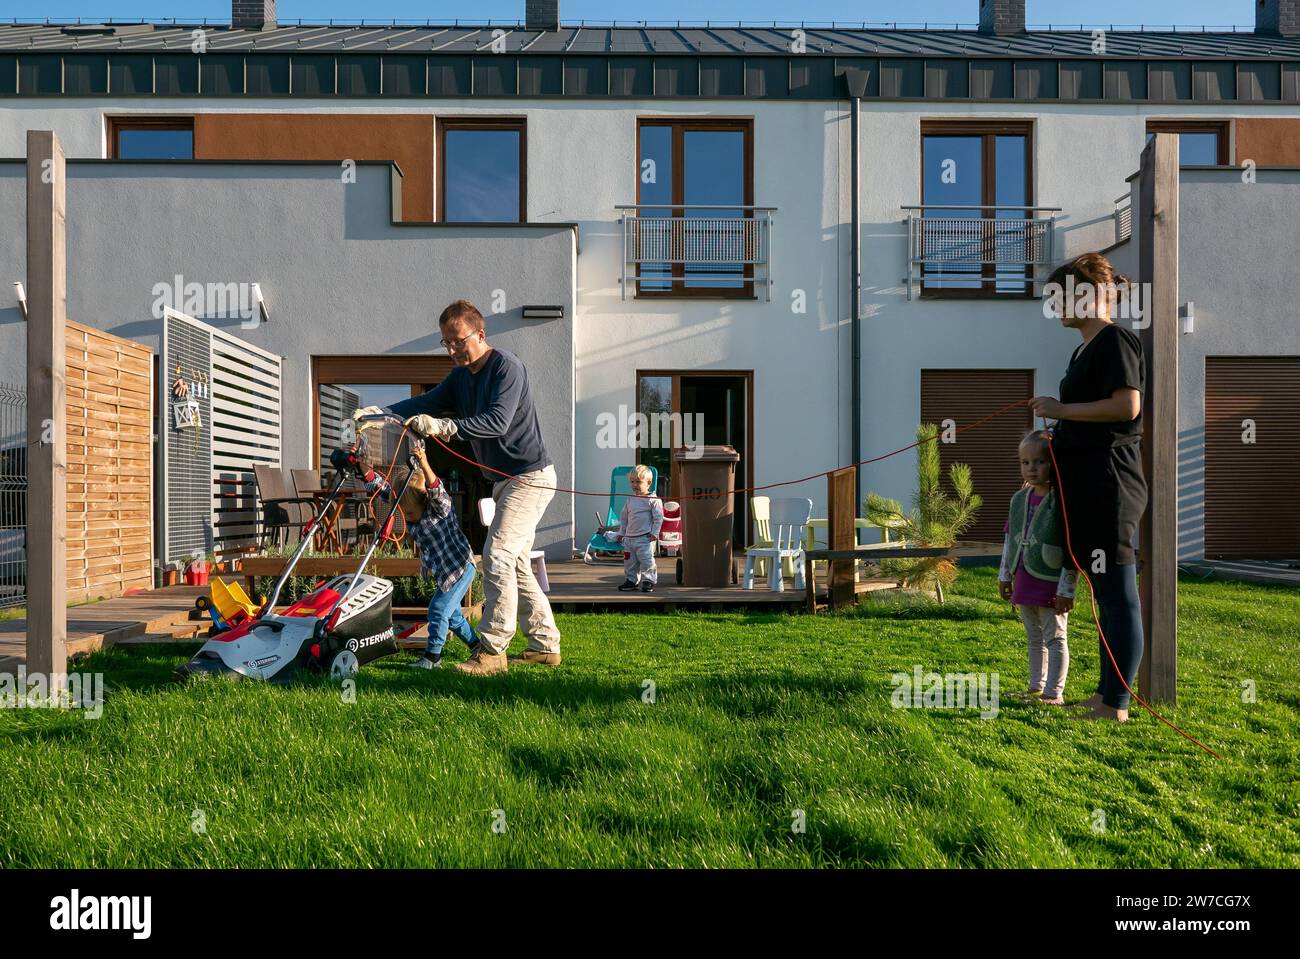 15.09.2018, Poland, Wrzesnia, Wielkopolska - Father and son mowing the lawn in the garden of their terraced house, mother with daughter holding cables Stock Photo